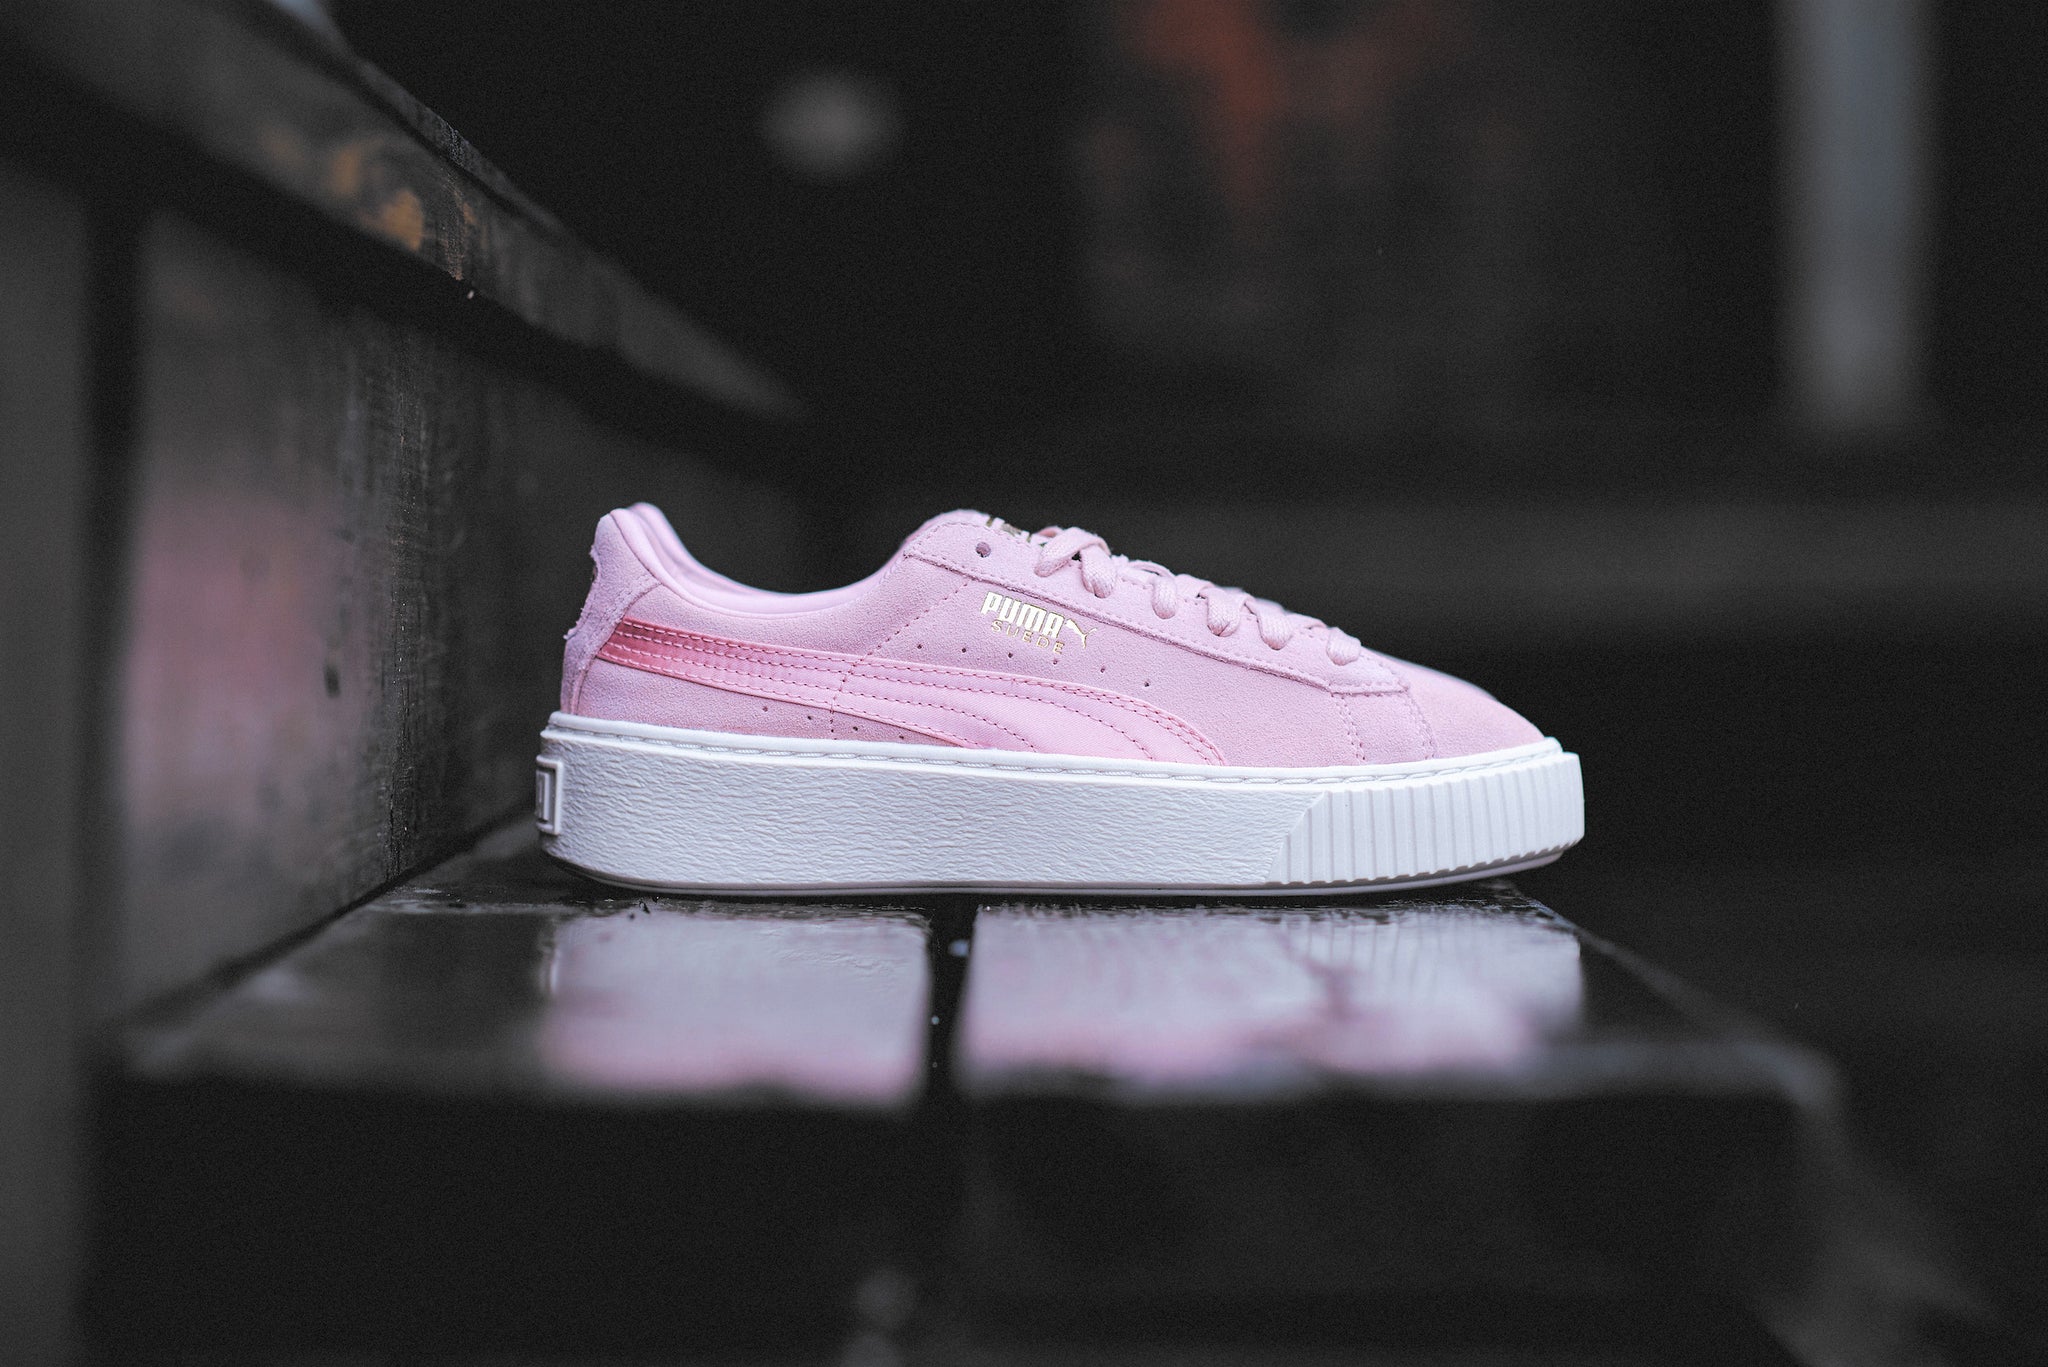 SNEAKER RELEASES | Puma Suede Platform Satin Launching May 25